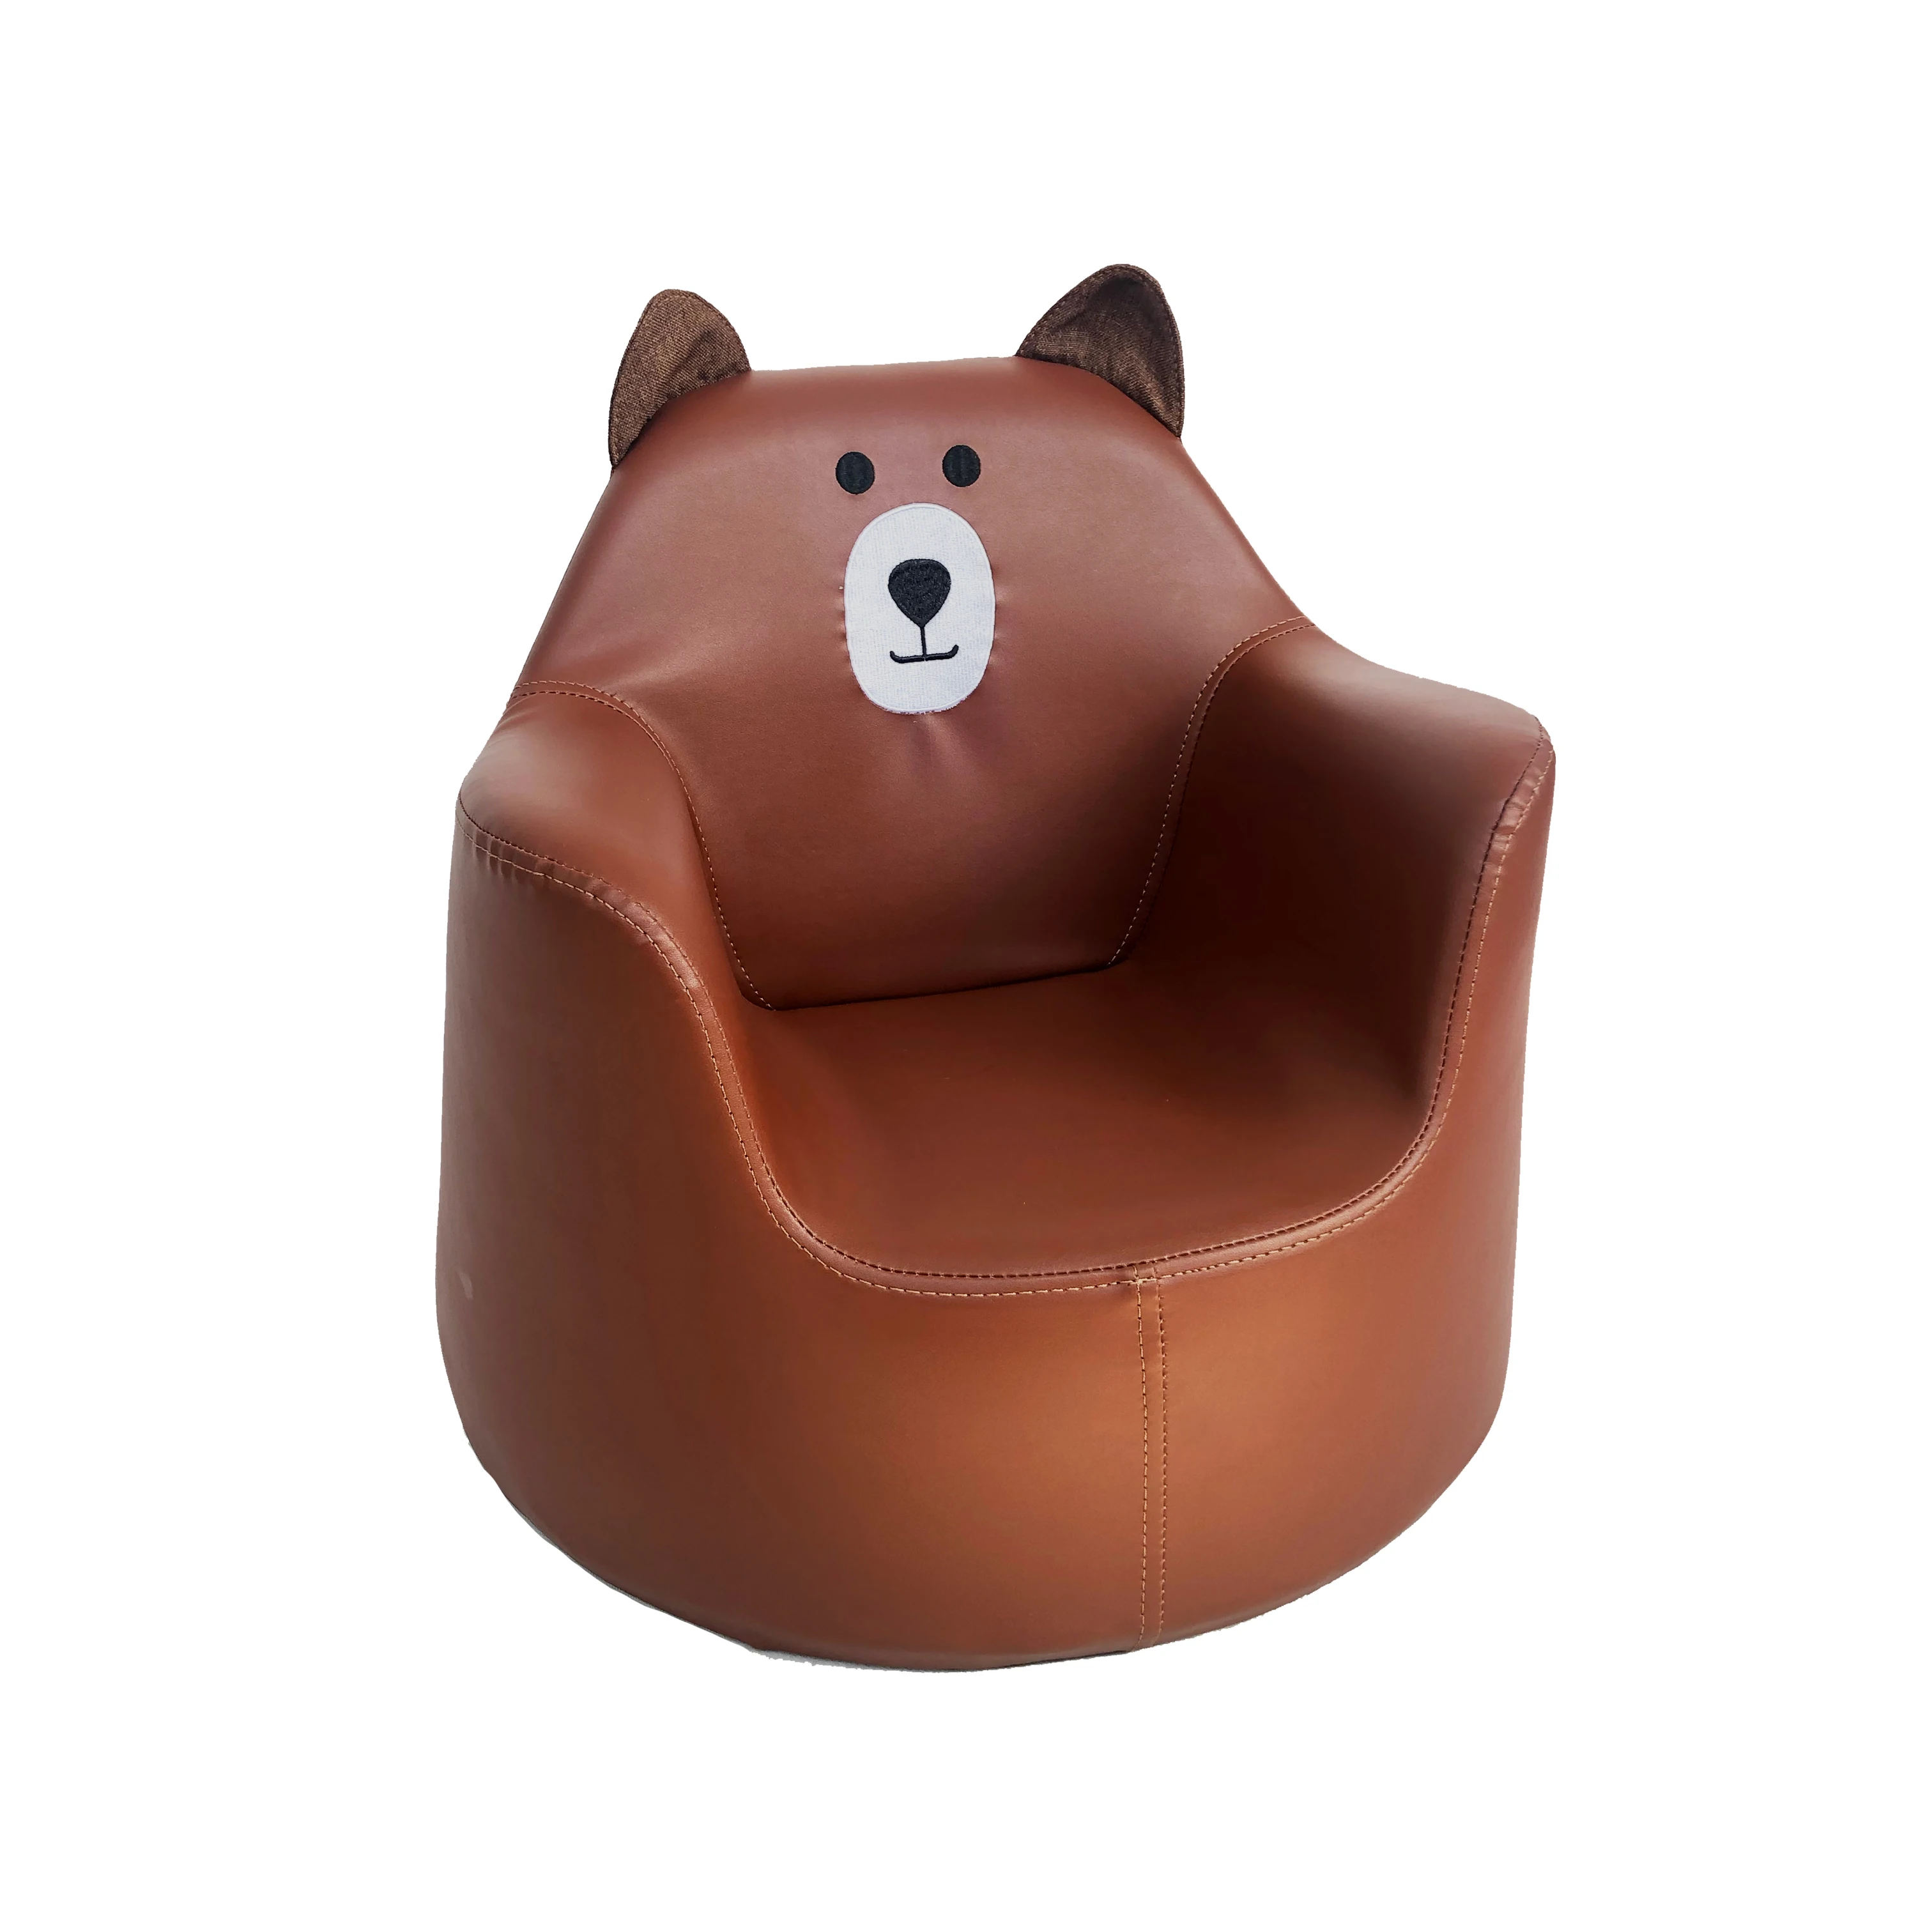 mini sofa chair for toddlers